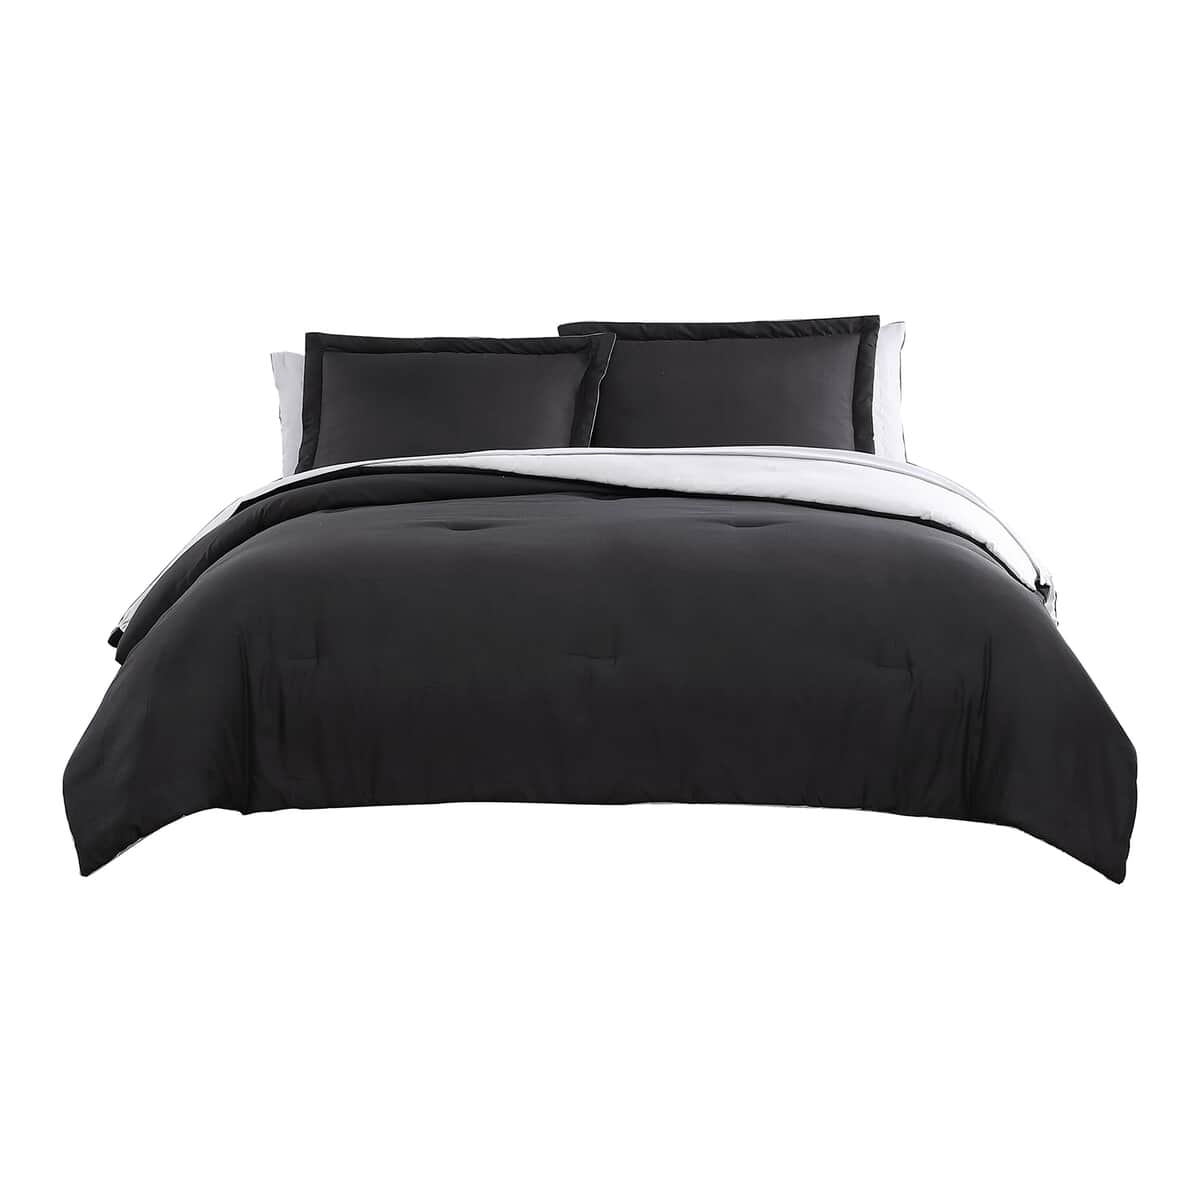 The Nesting Company - Chestnut Reversible 7 Piece Bed in a bag Comforter Set - Black & Gray (Queen) | Bed Comforters | Polyester Comforter | Bedding Sets | Quilt Set image number 3